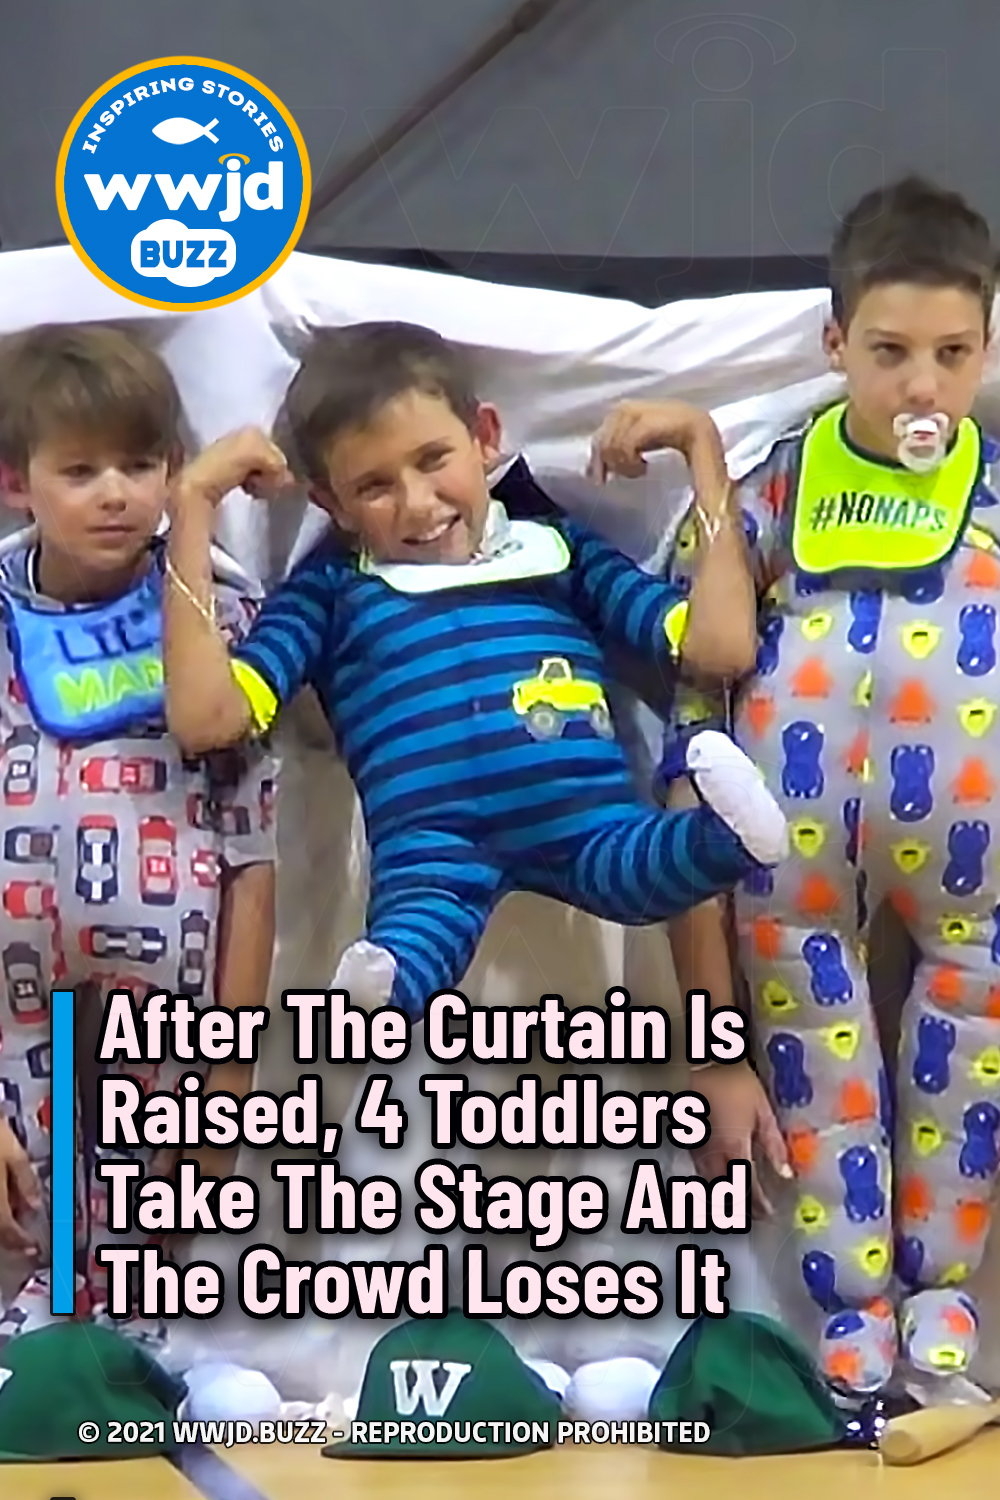 After The Curtain Is Raised, 4 Toddlers Take The Stage And The Crowd Loses It